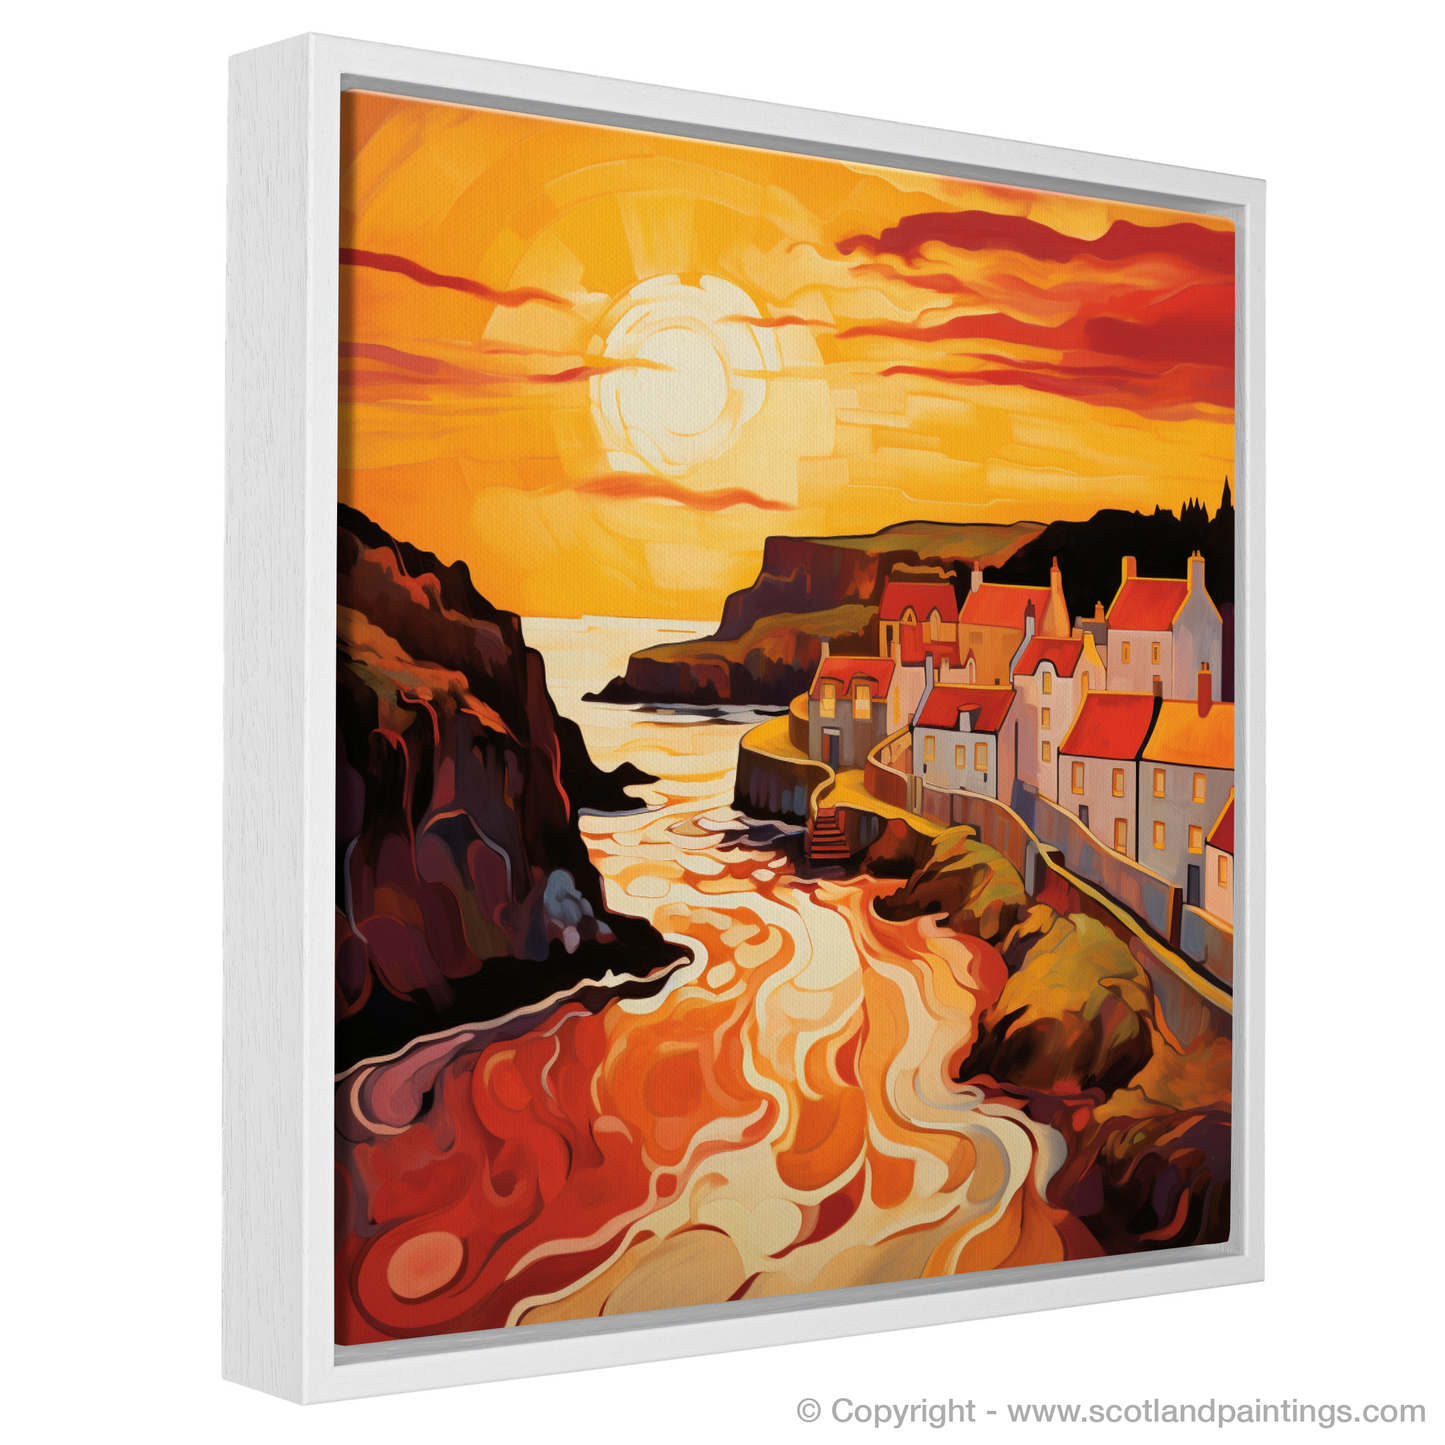 Portsoy Harbour at Golden Hour: An Abstract Symphony of Light and Colour